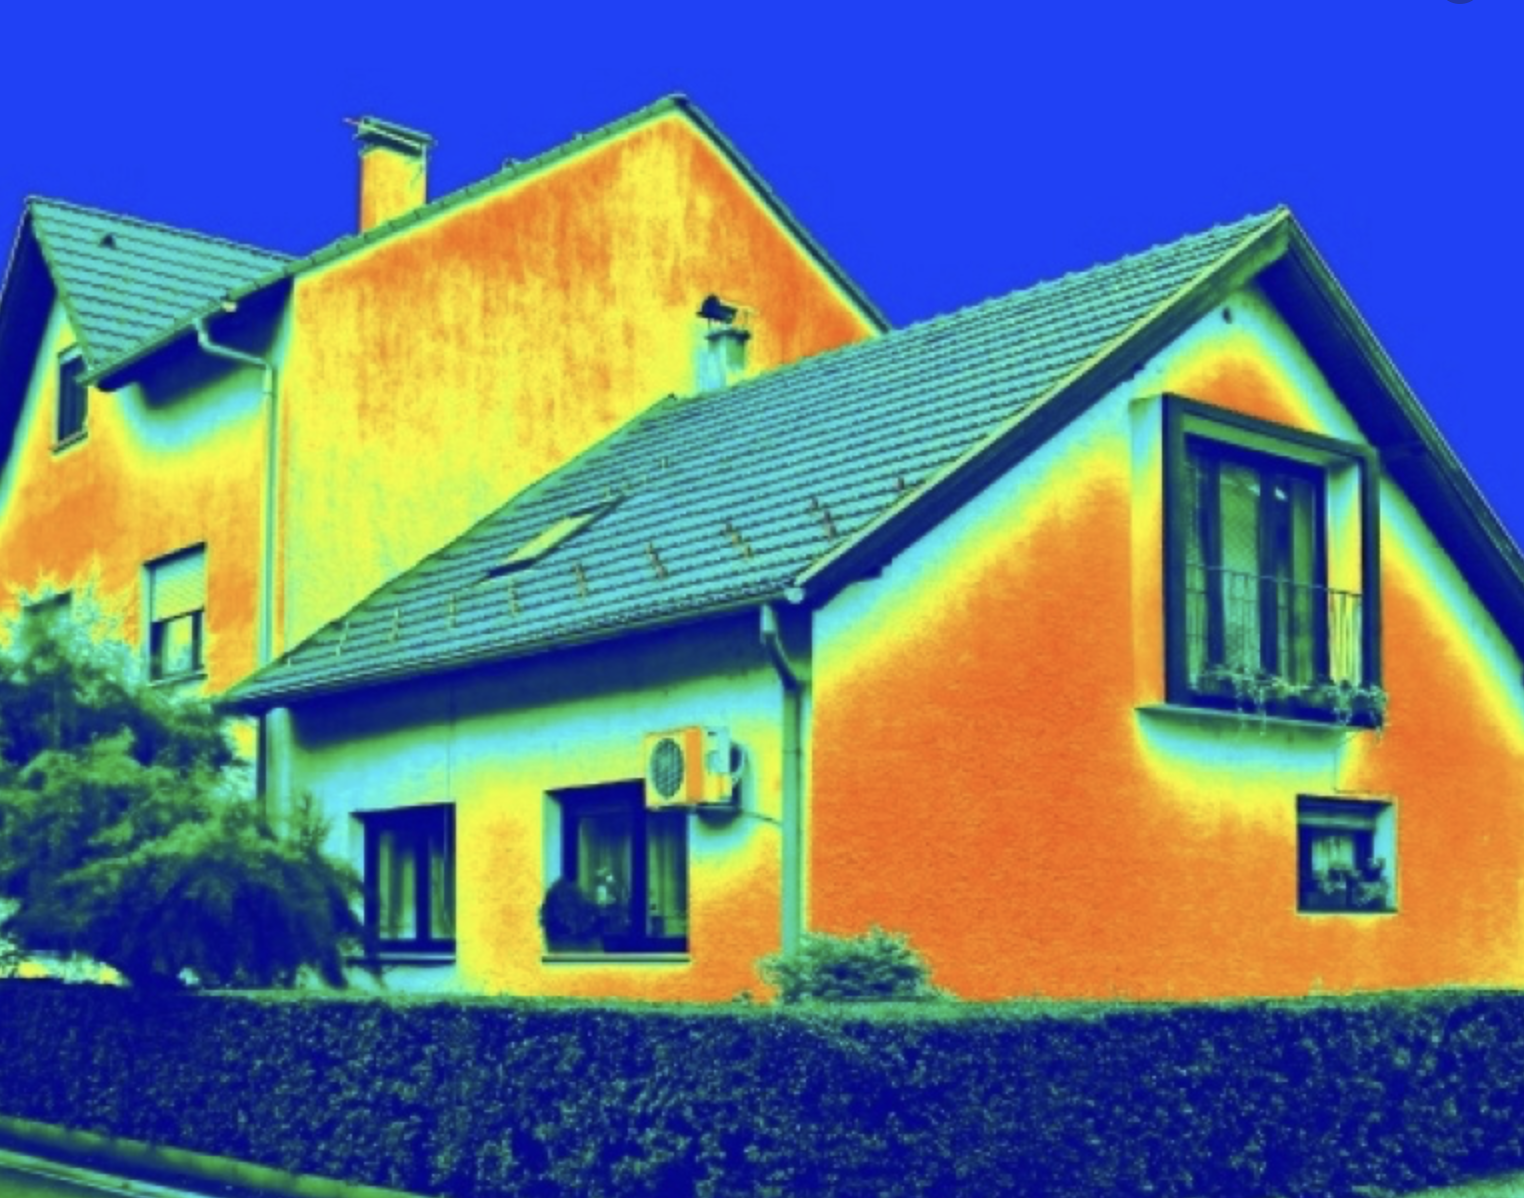 Houses need to be well insulated